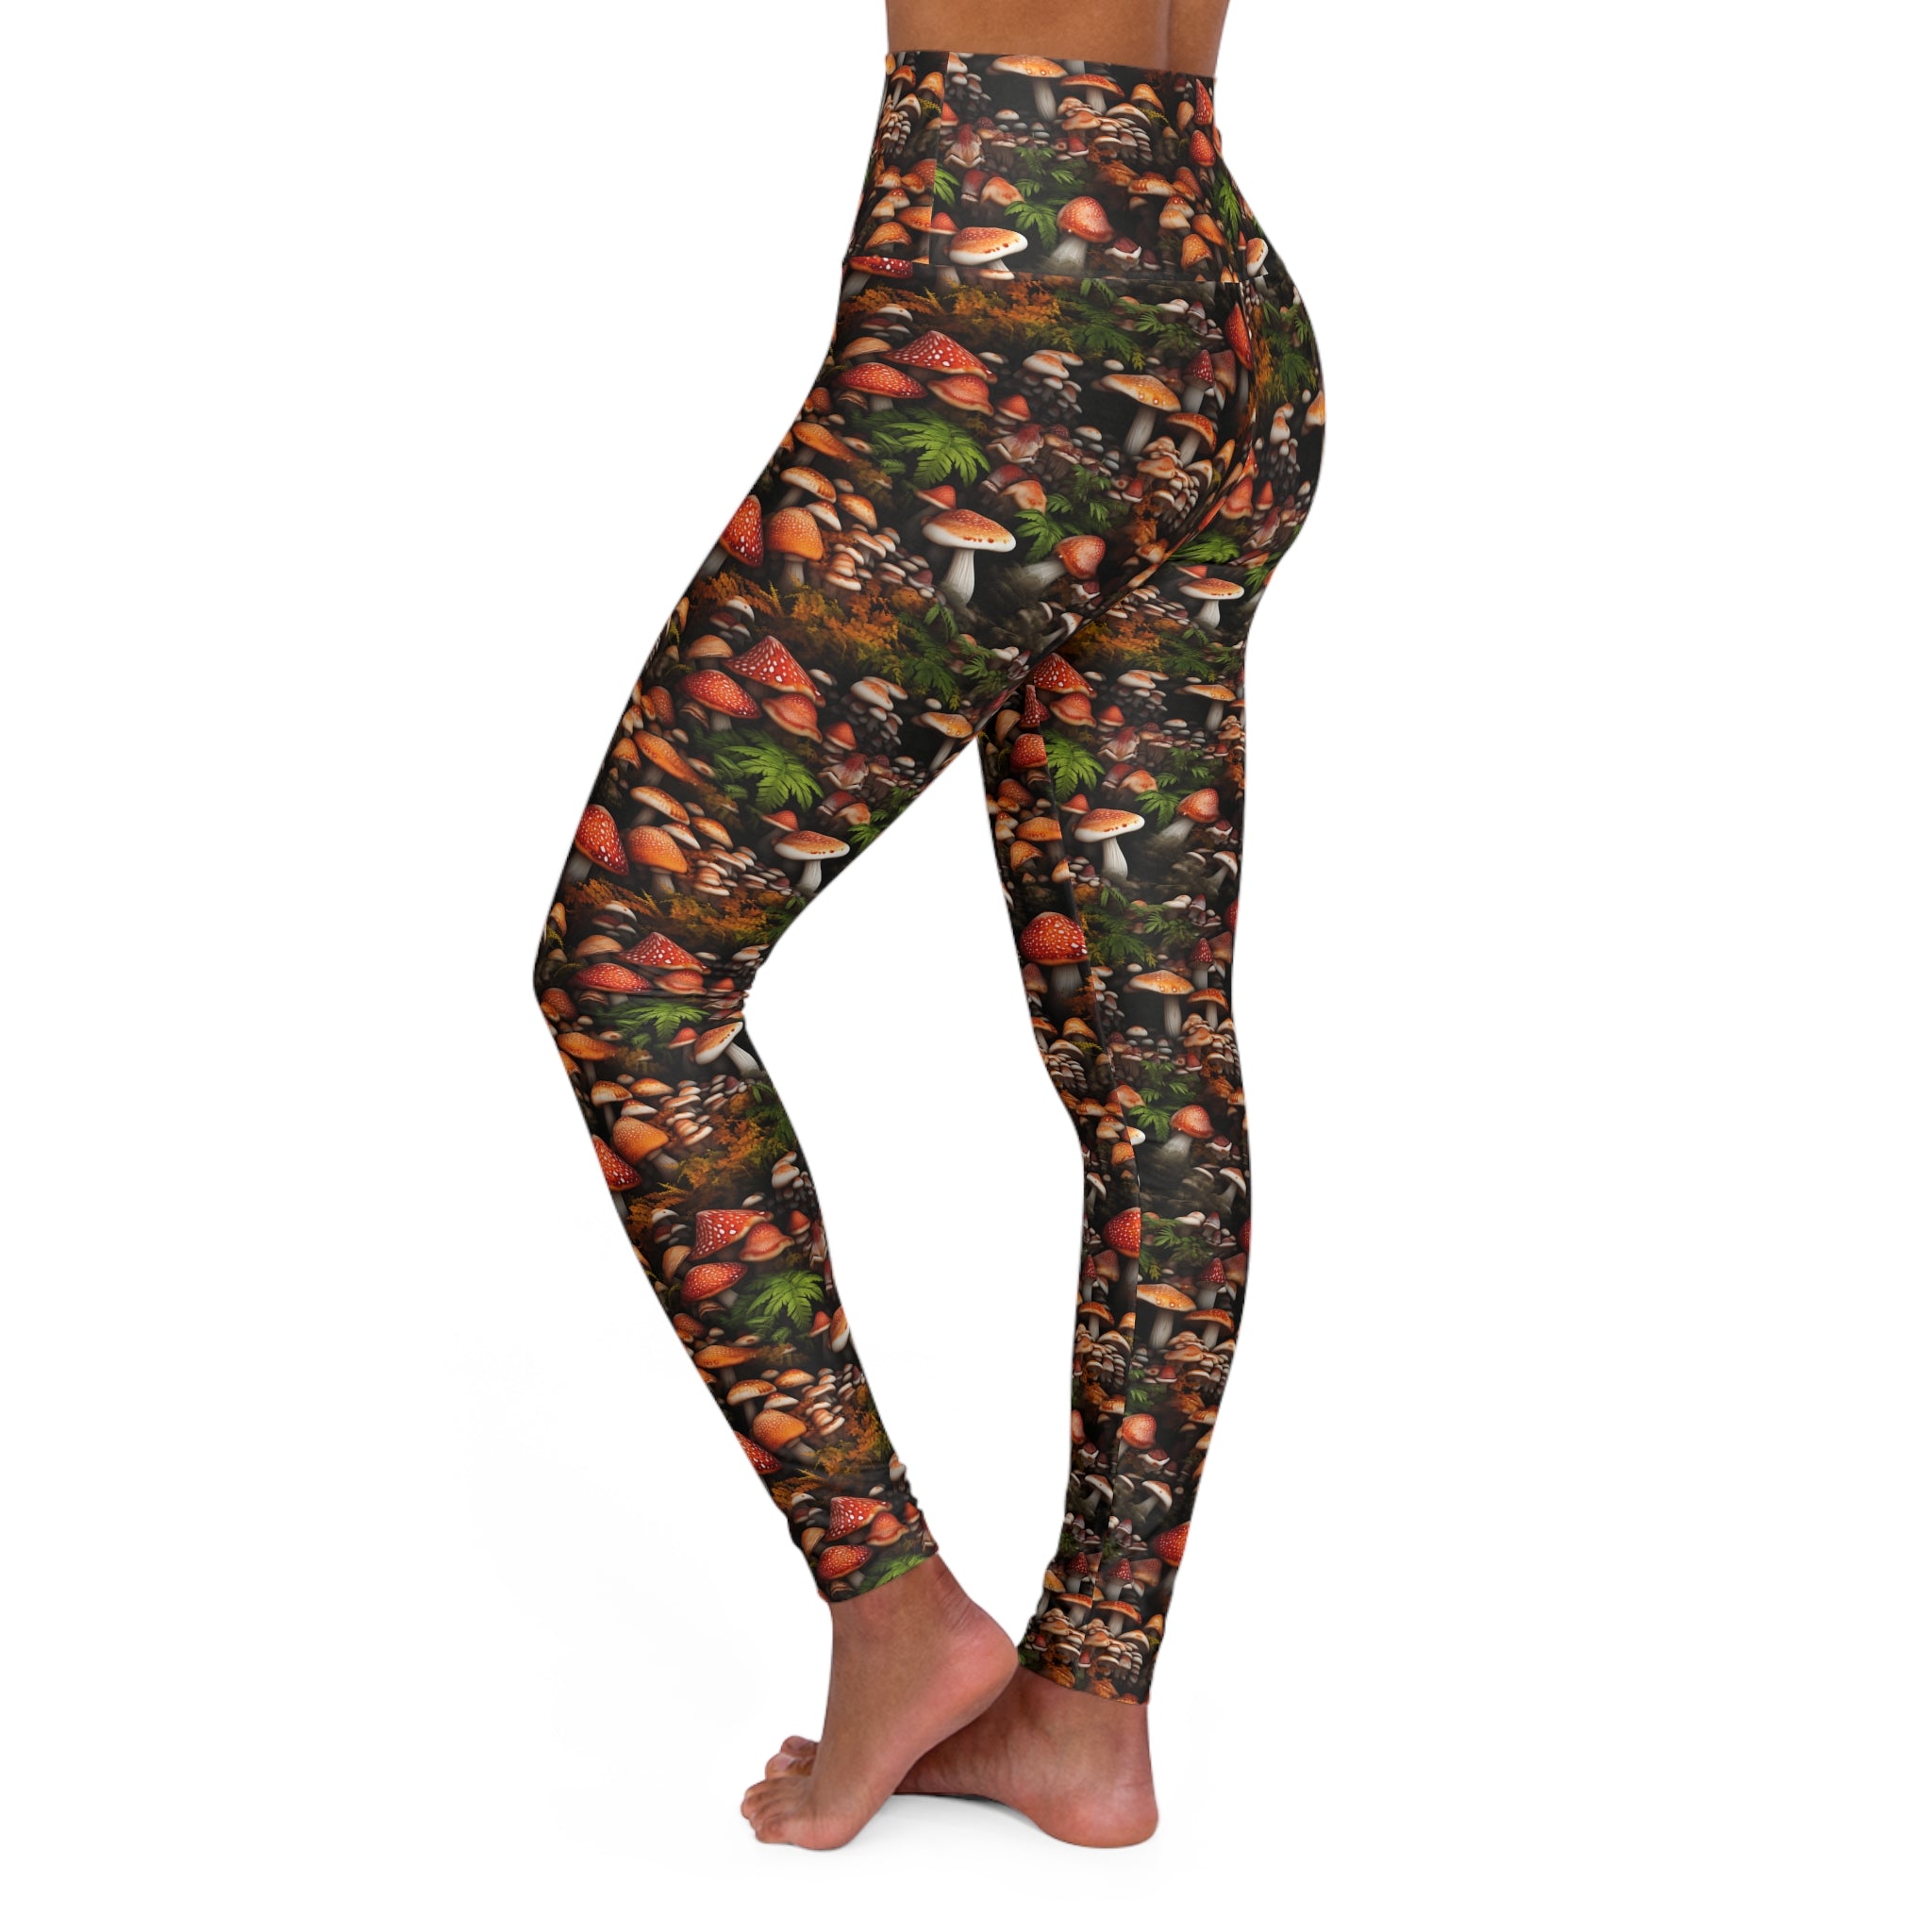 Chic Mushroom Gym Leggings for Women S-2XL - Elevate Your Workout